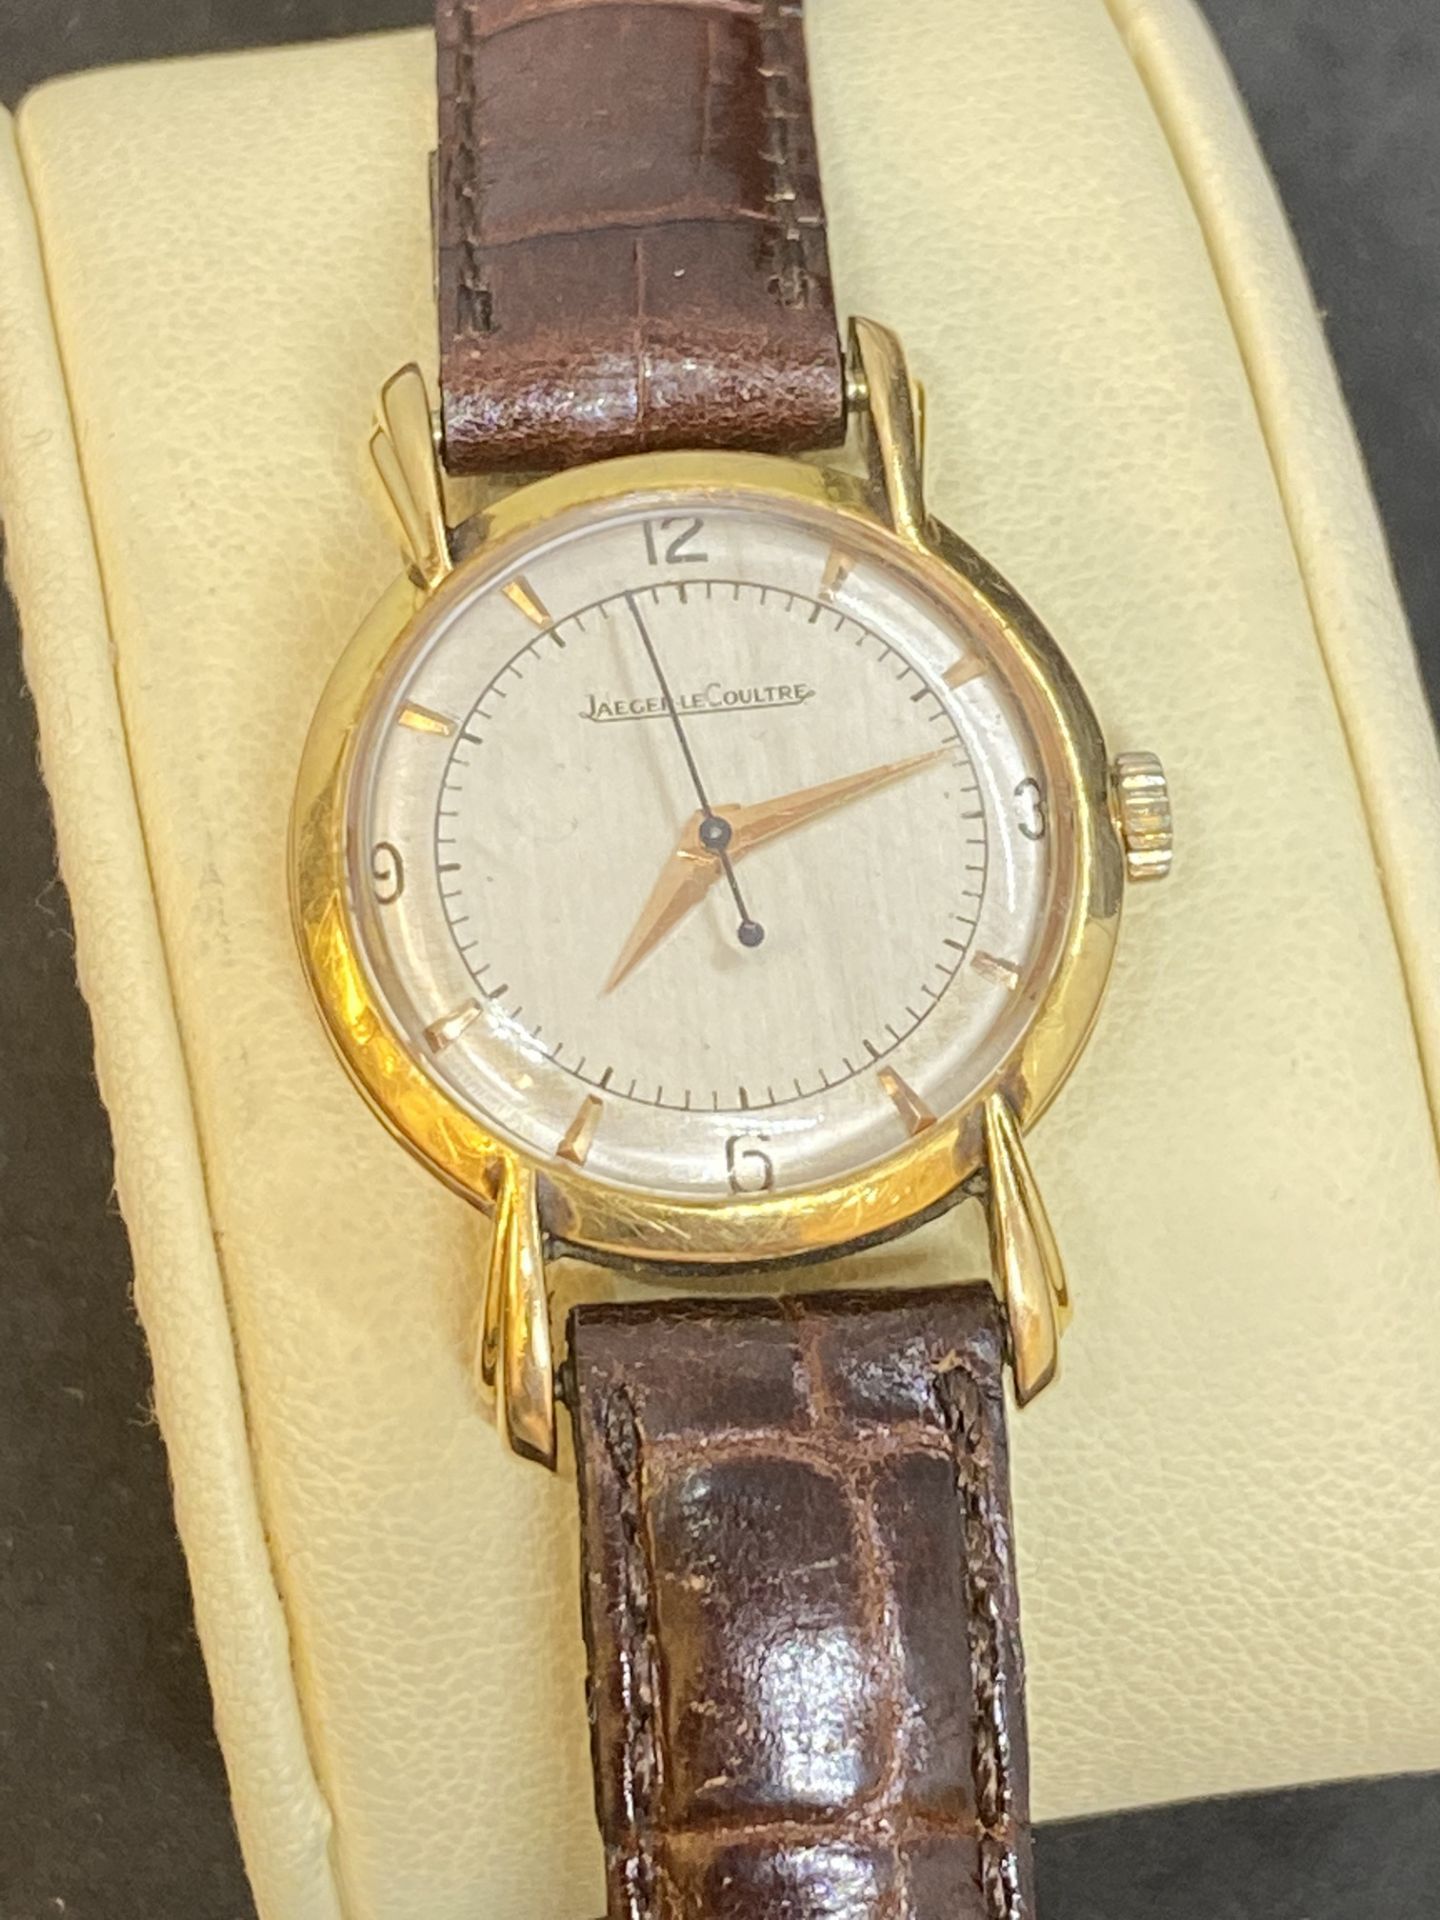 JAEGER LECOULTRE 18ct GOLD WATCH - Image 3 of 9